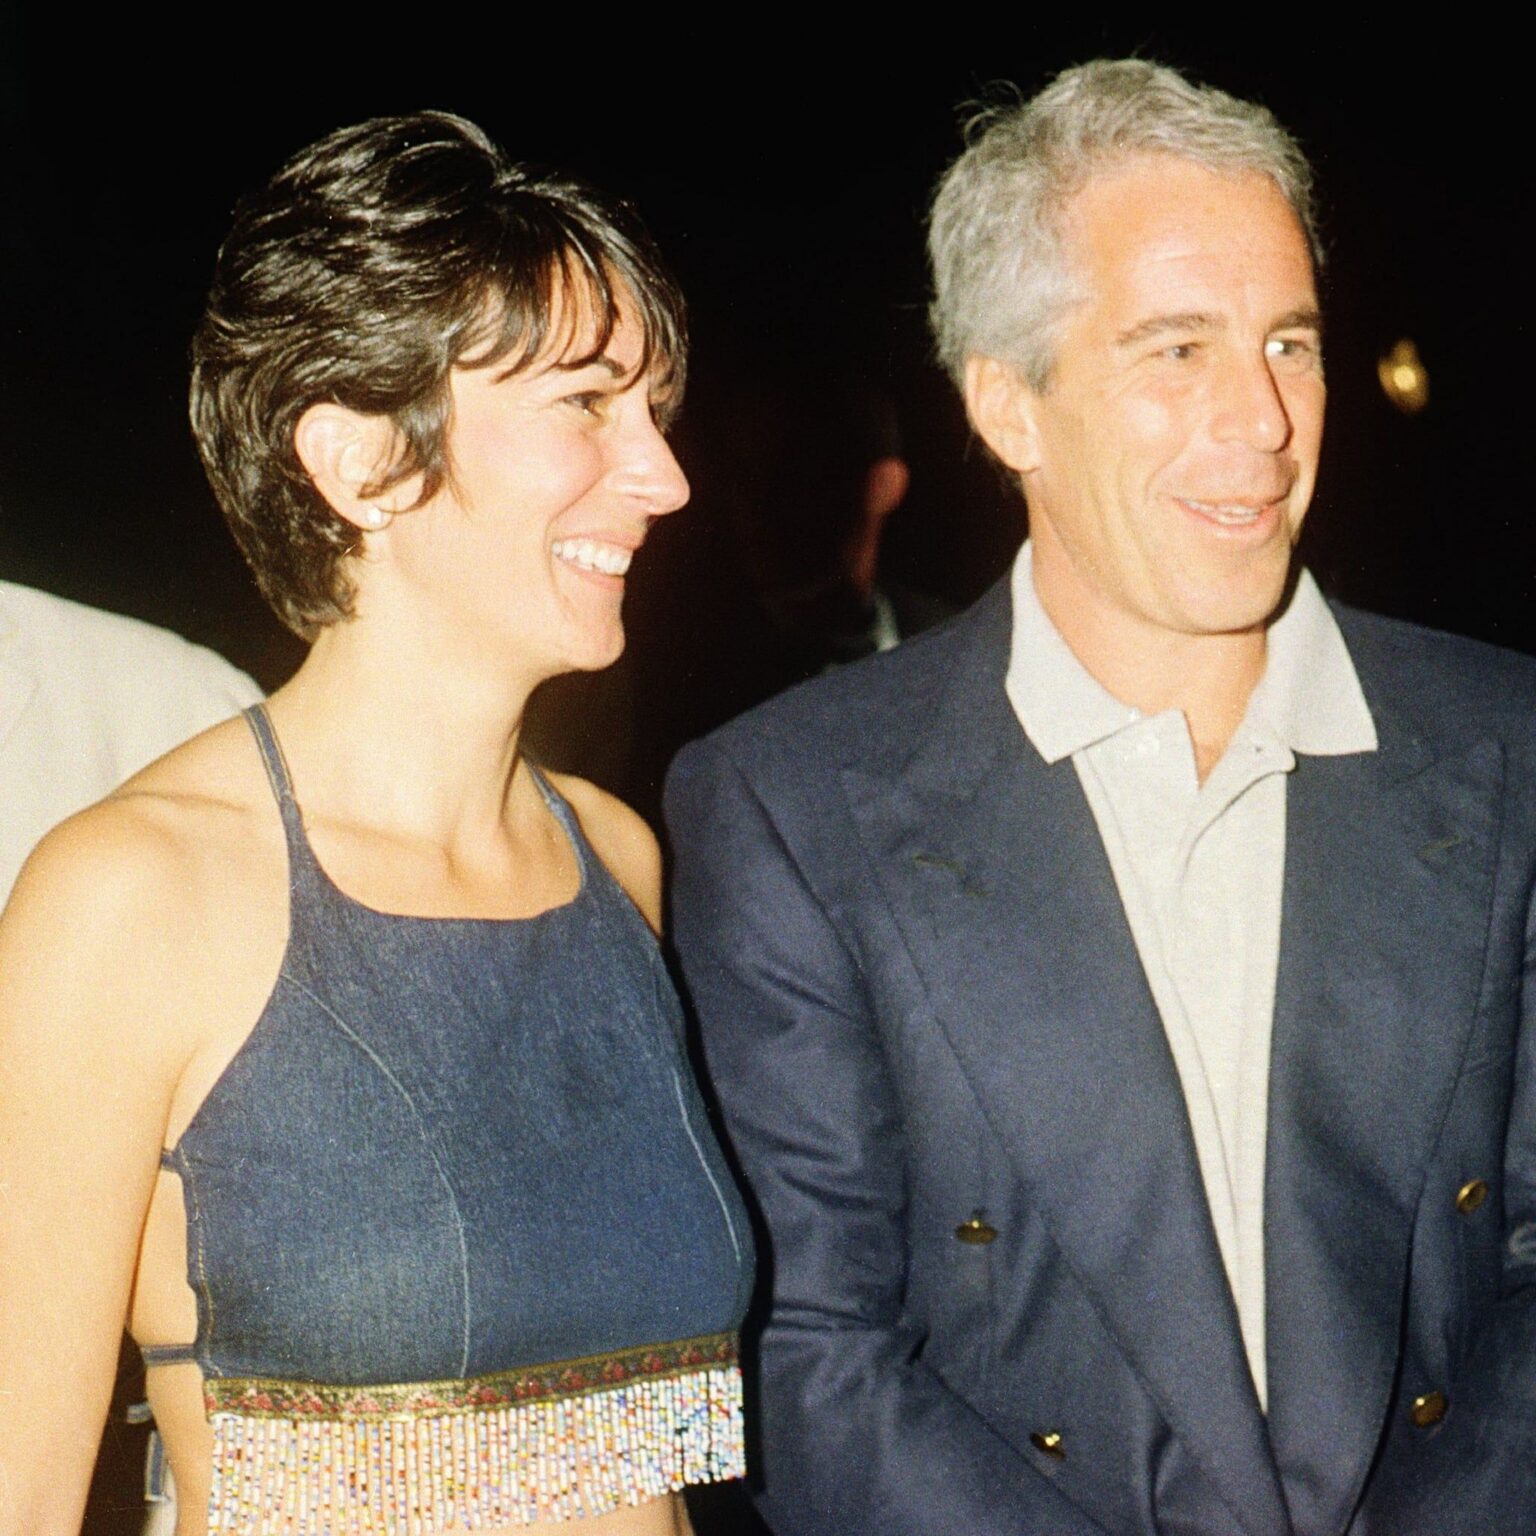 Over the years, Jeffrey Epstein has been linked romantically to numerous women. But did he put a ring on any of them and make them his wife?